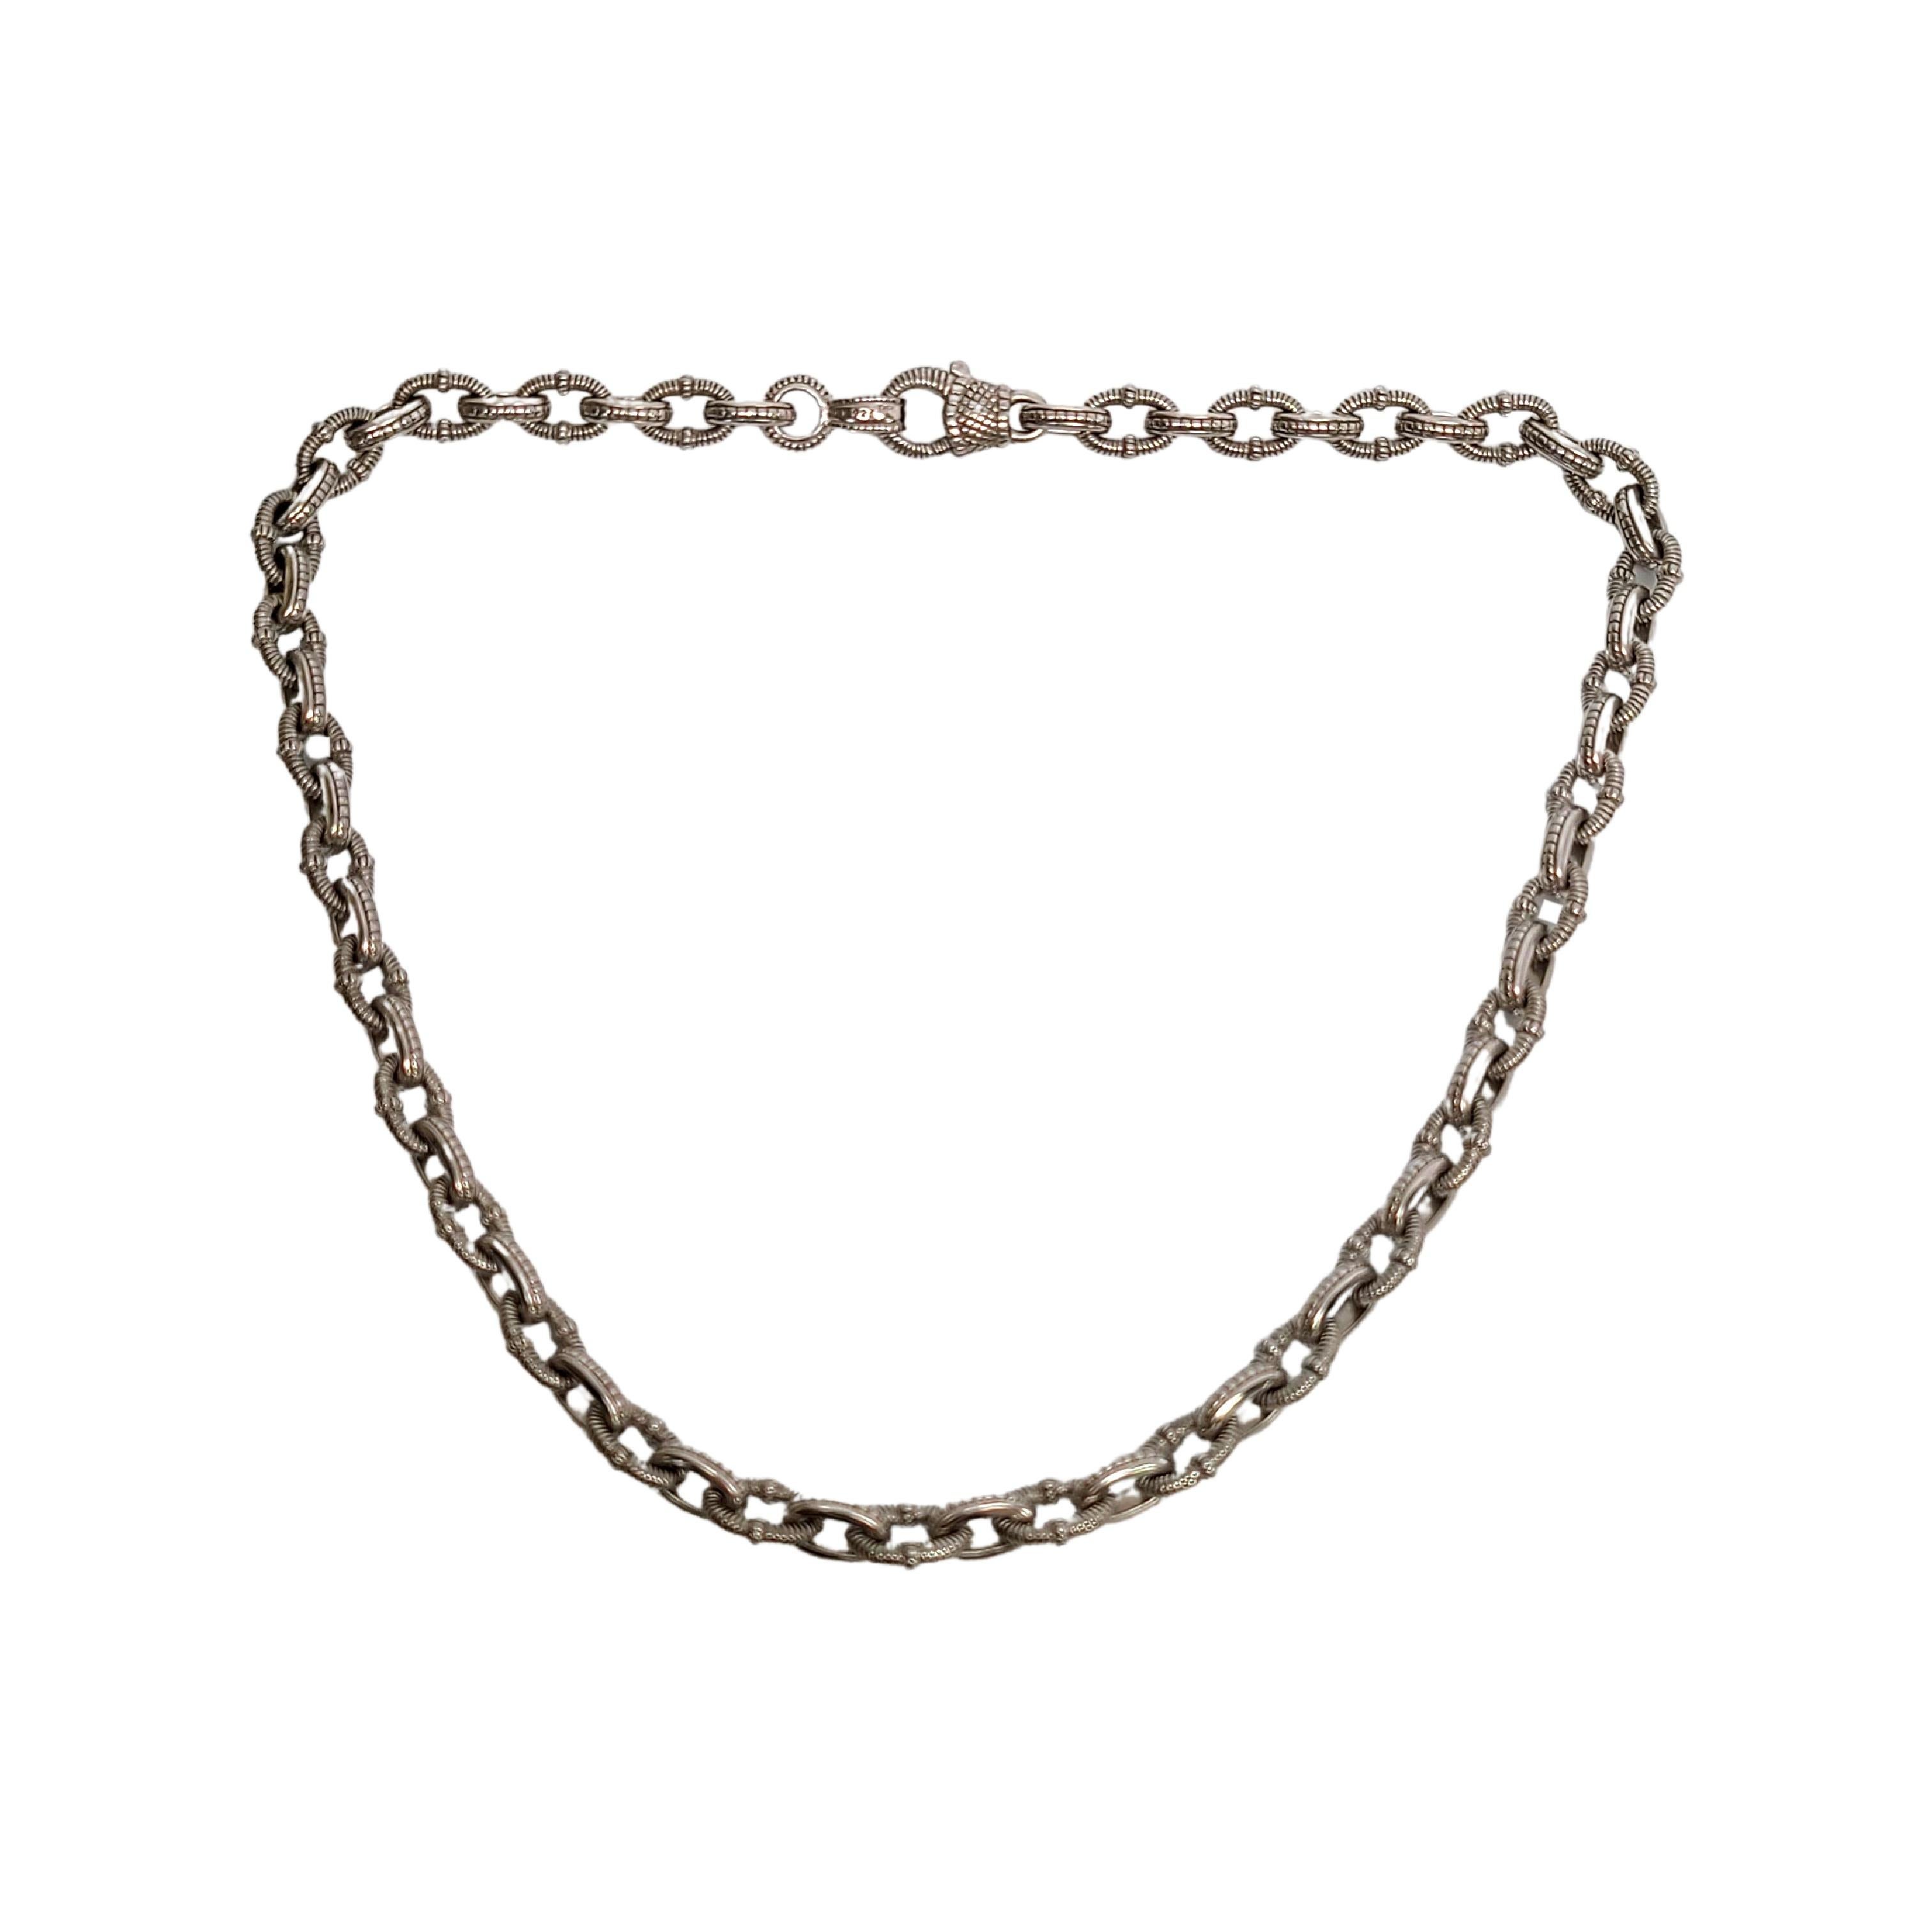 Sterling silver textured link necklace with 18K plated and diamond accent clasp, by designer Judith Ripka.

This beautiful piece features alternating textured and beaded oval elongated links. Textured clasp features a small gold accent with a small